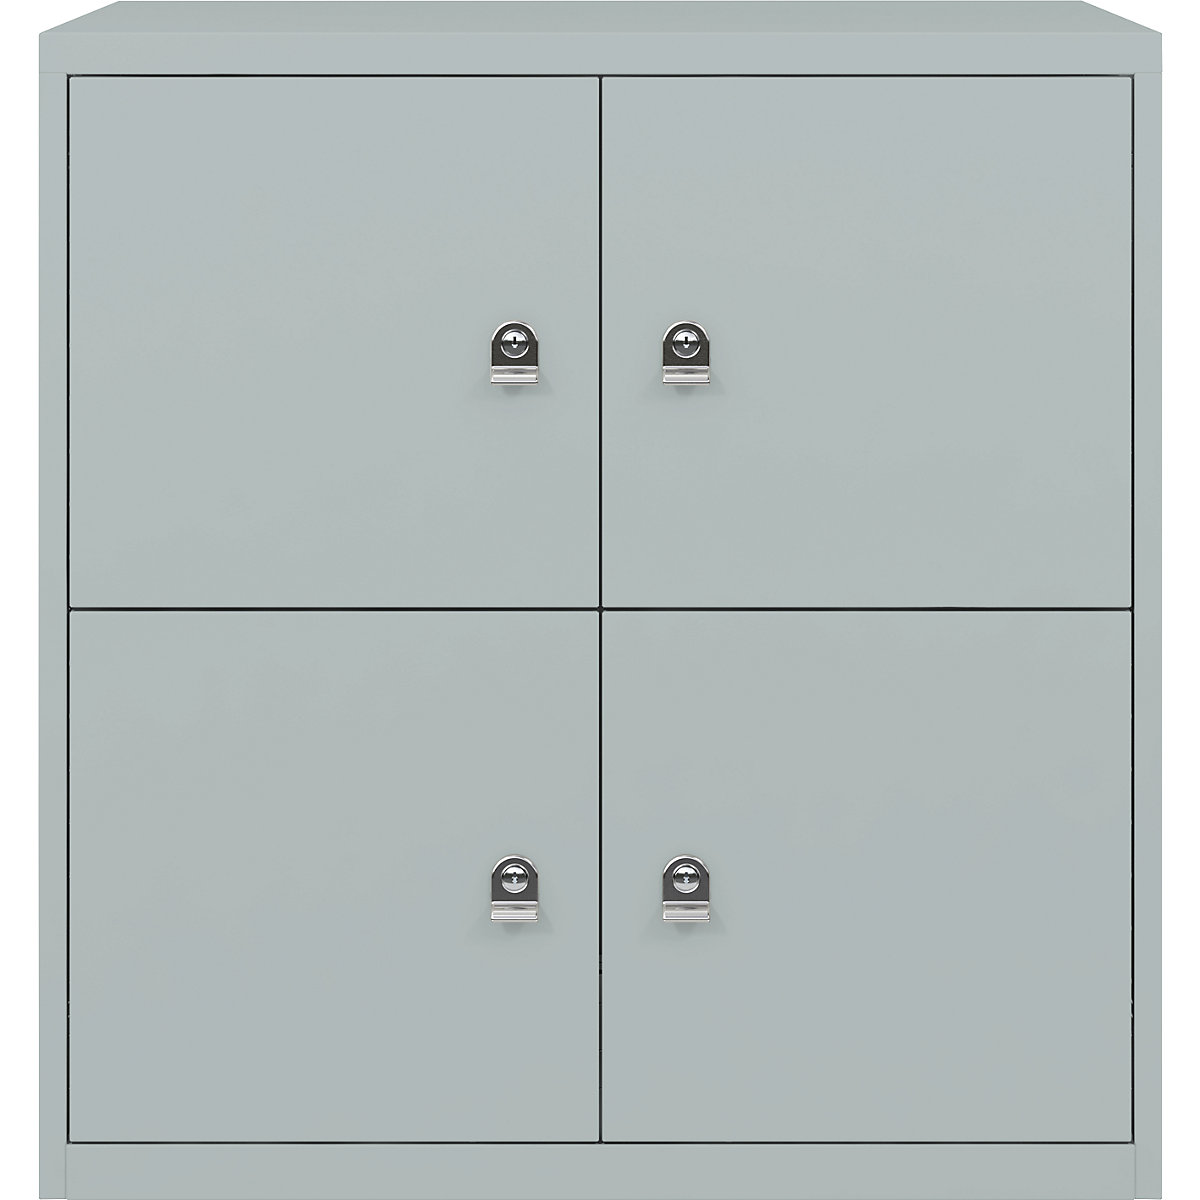 LateralFile™ lodge – BISLEY, with 4 lockable compartments, height 375 mm each, silver